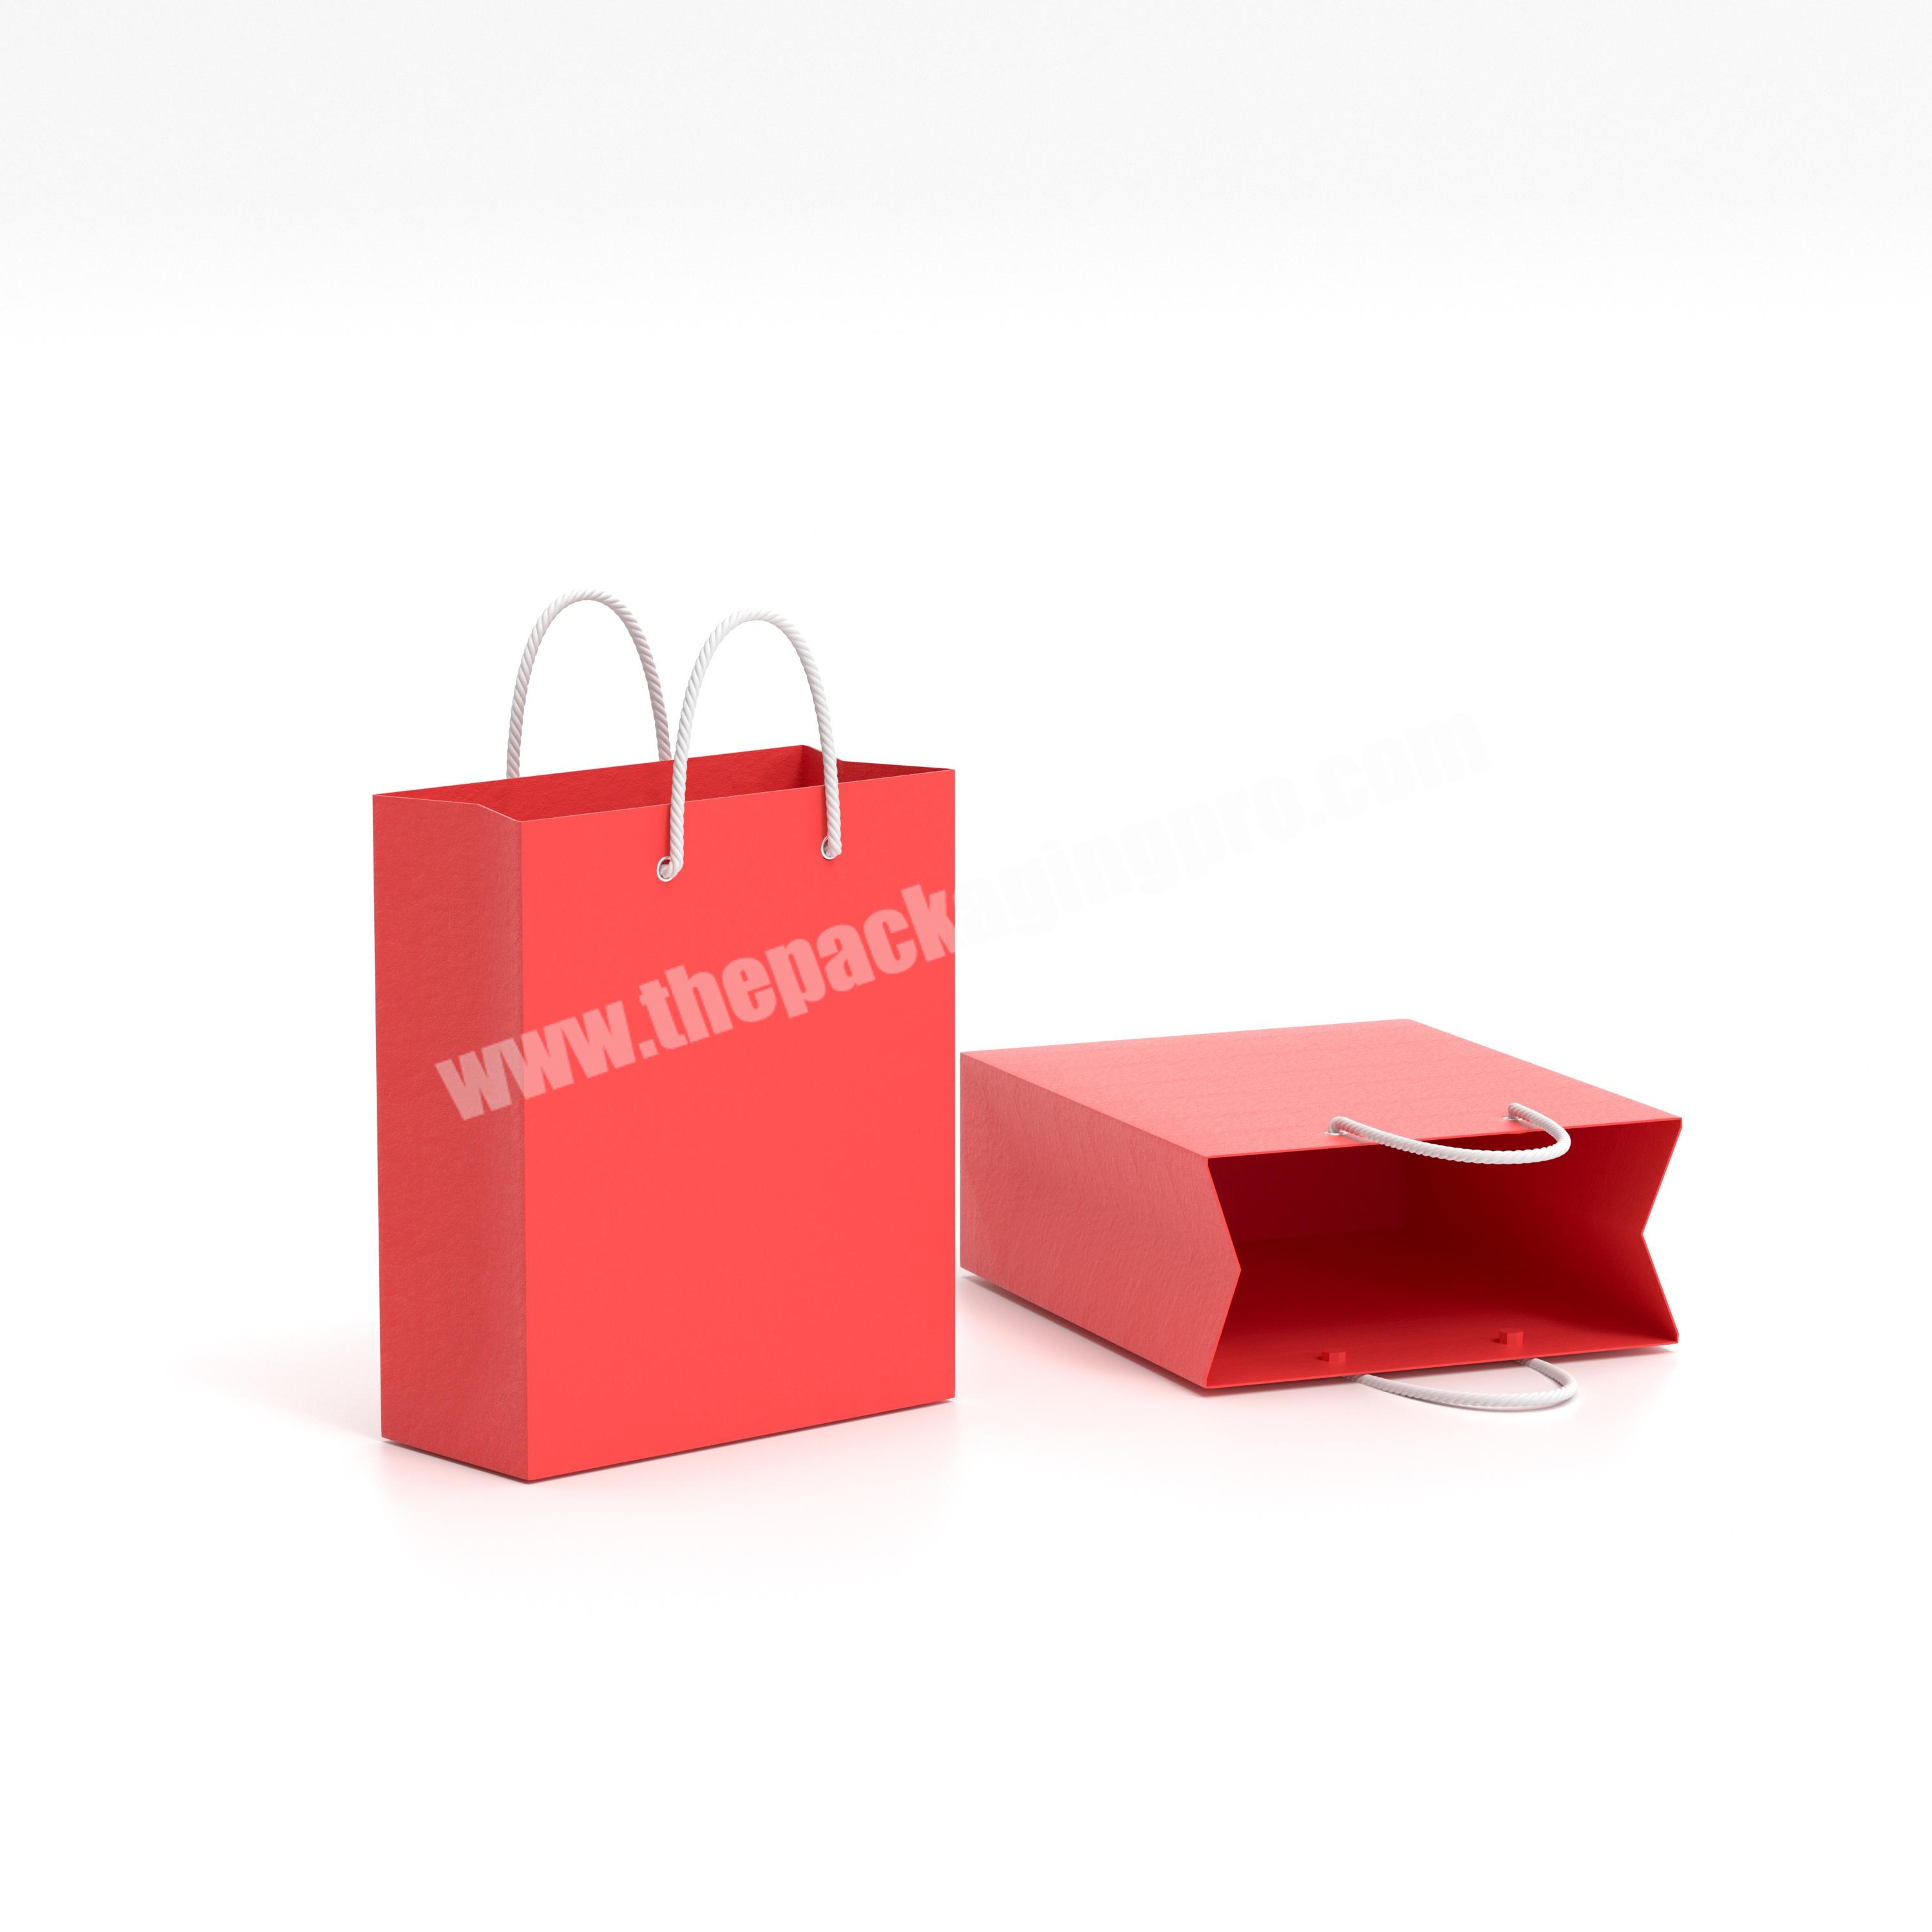 Hot Retail Merchandise Bags Pink Shopping Kraft Paper Party cosmetic gift bags packaging boxes for small business